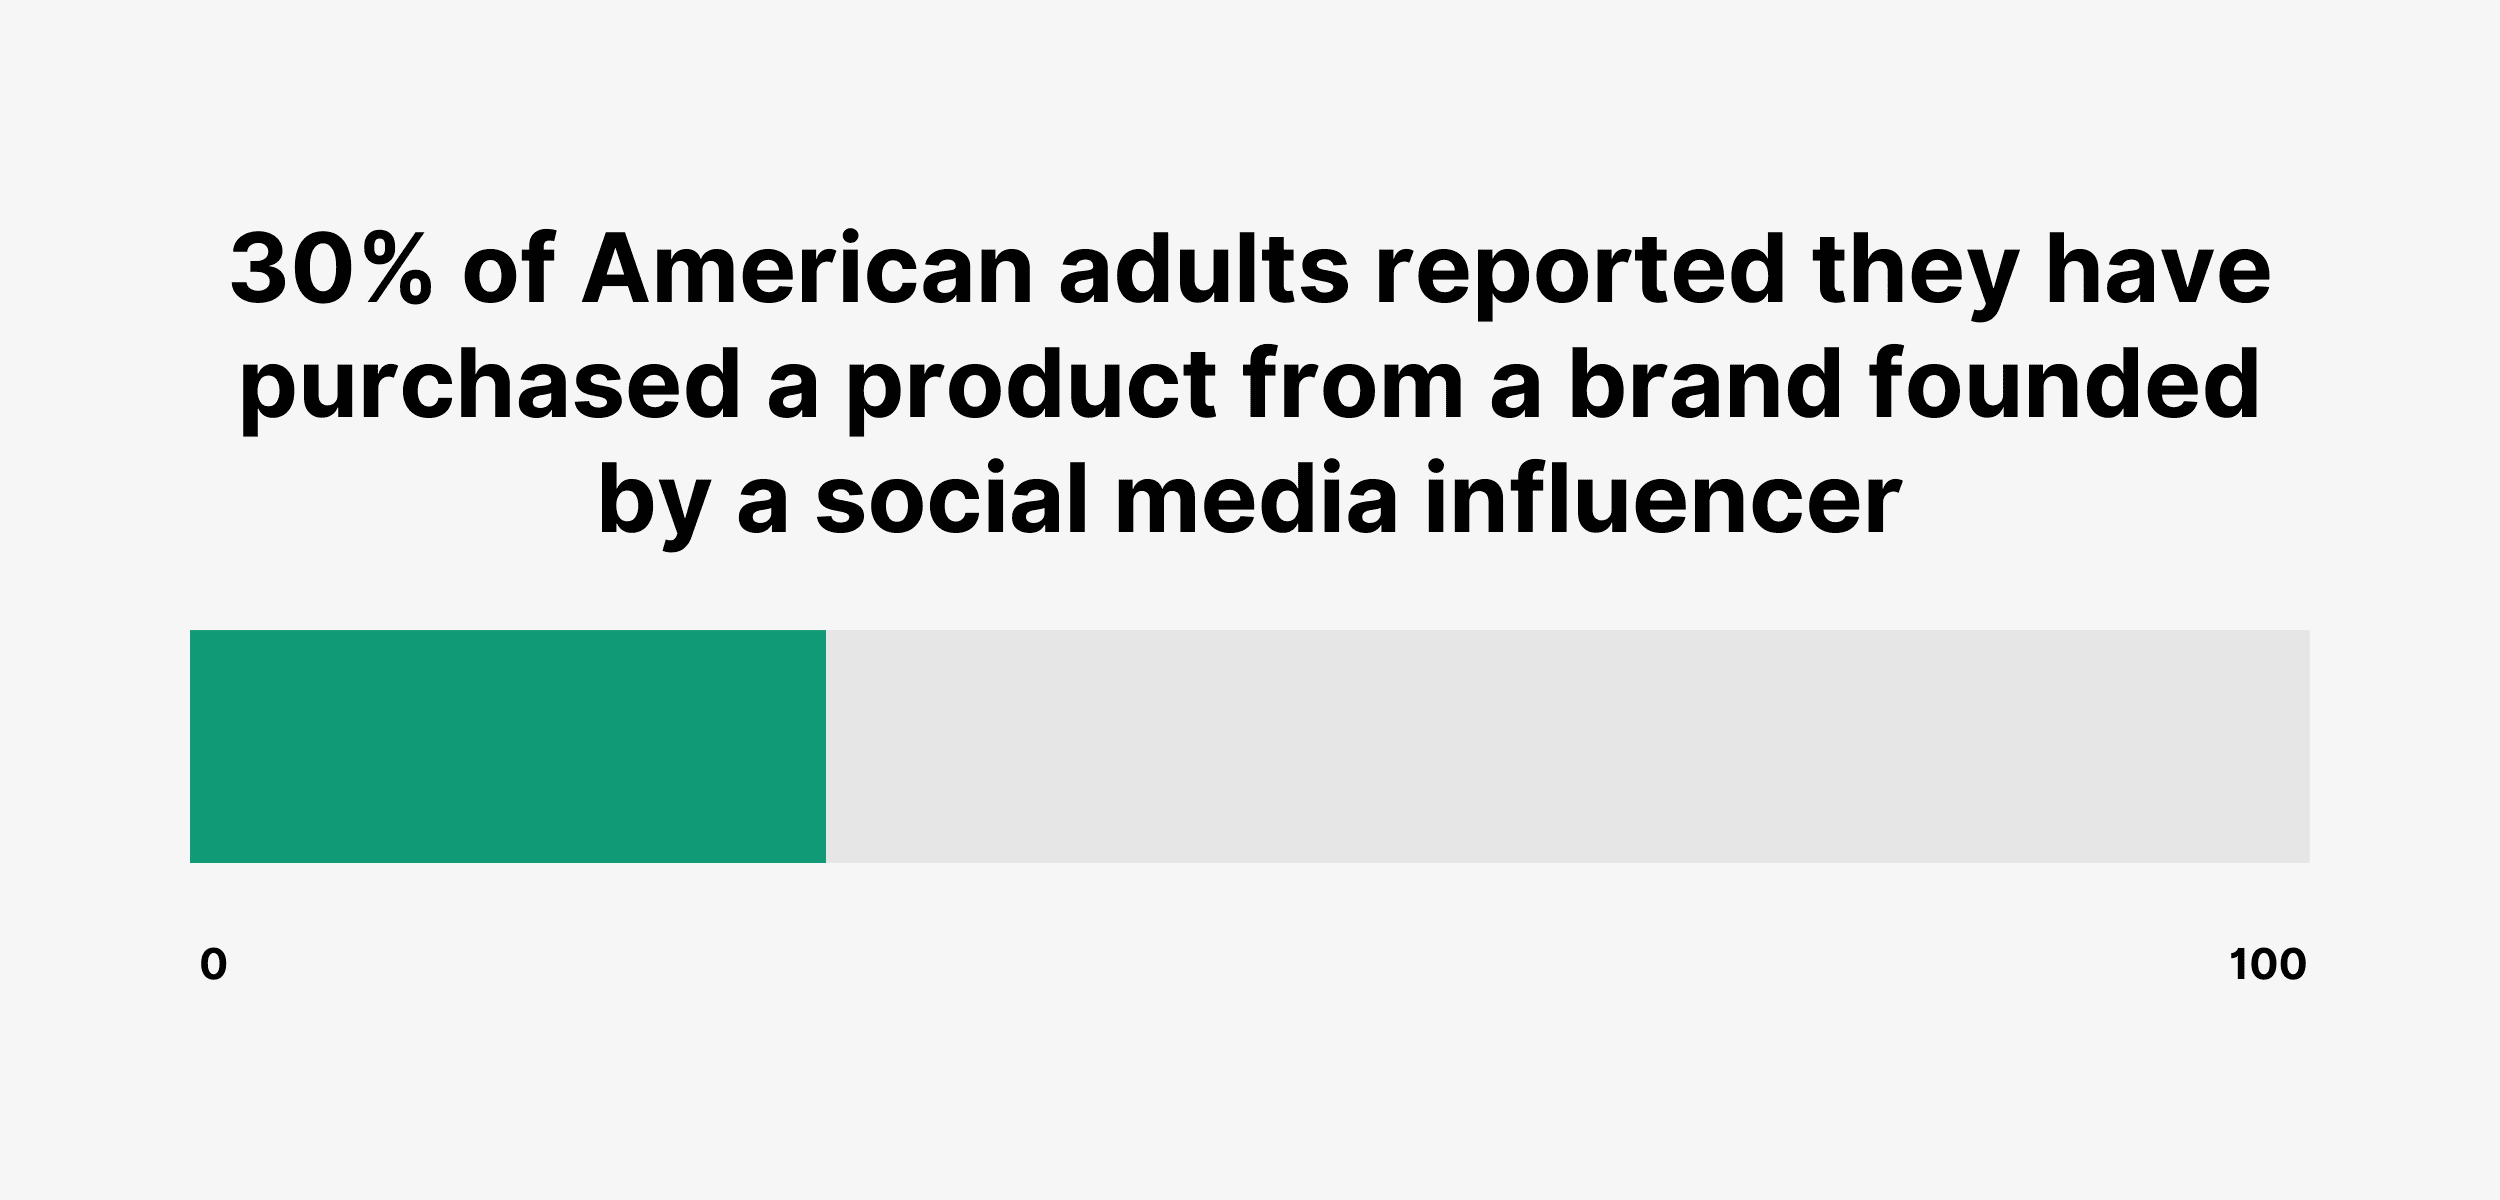 30% of American adults reported they have purchased a product from a brand founded by a social media influencer